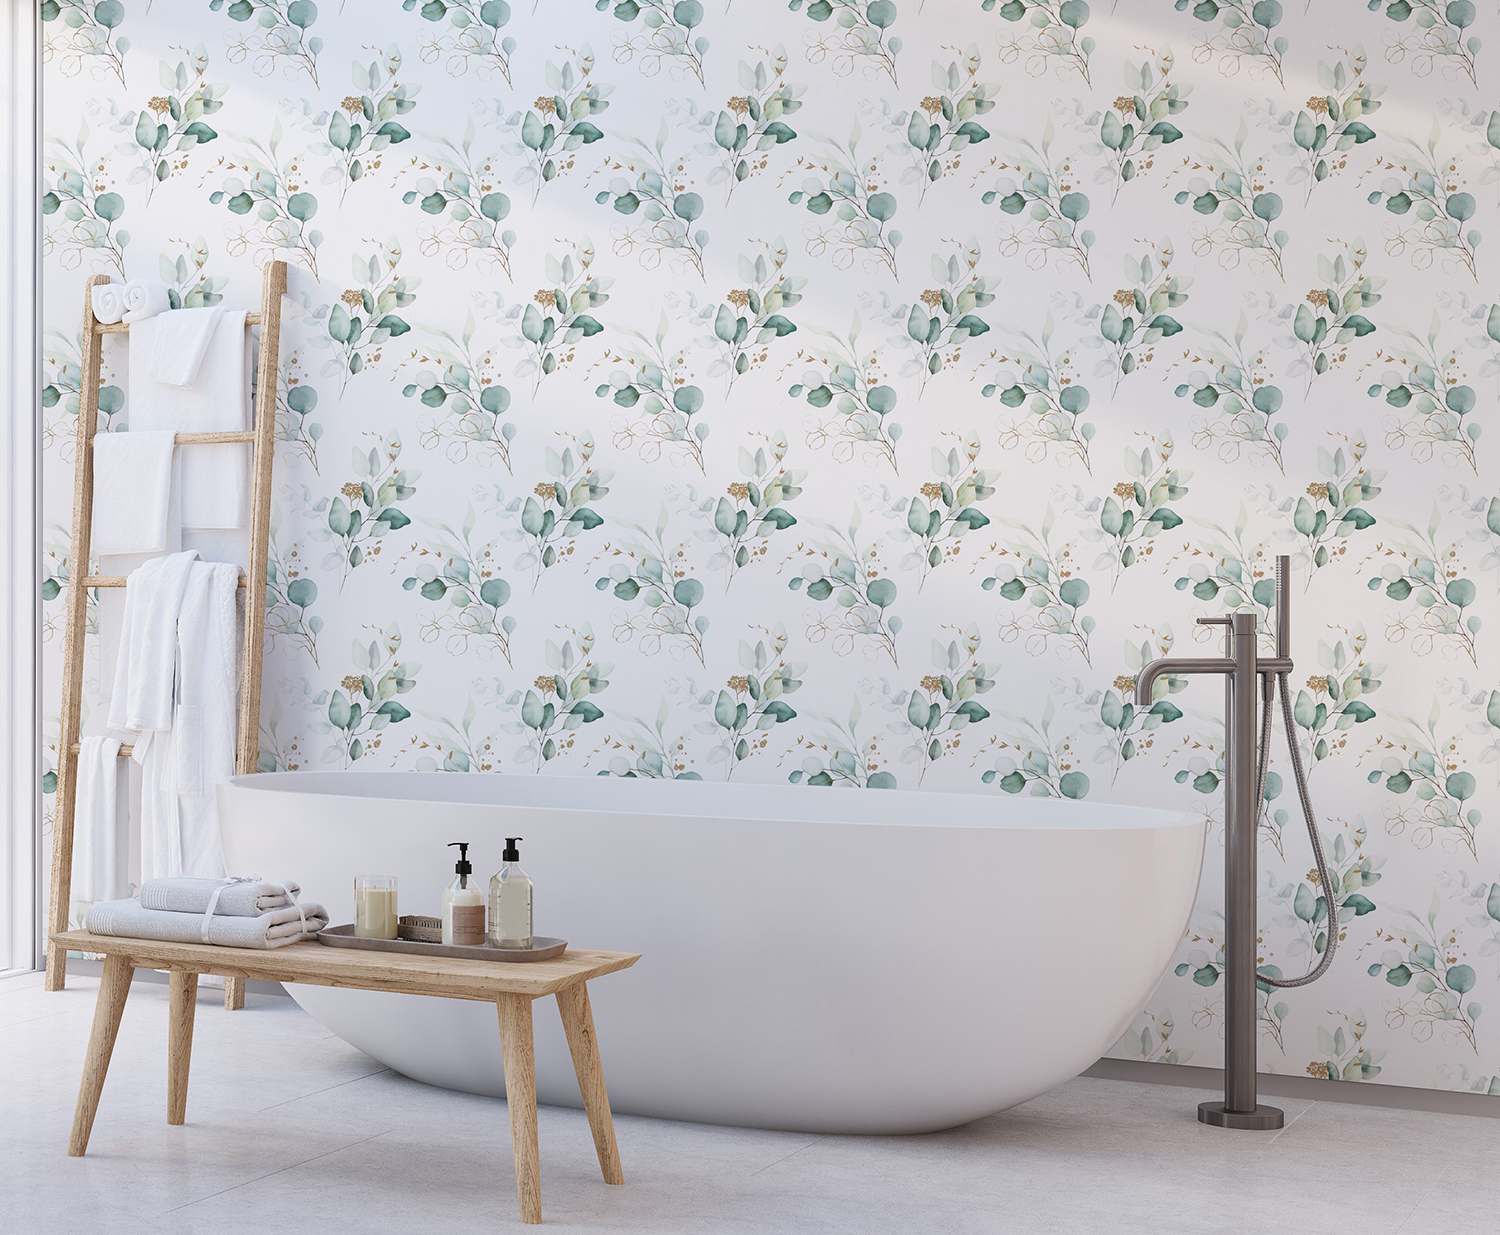 Best Places to Buy Removable Wallpaper for Walls